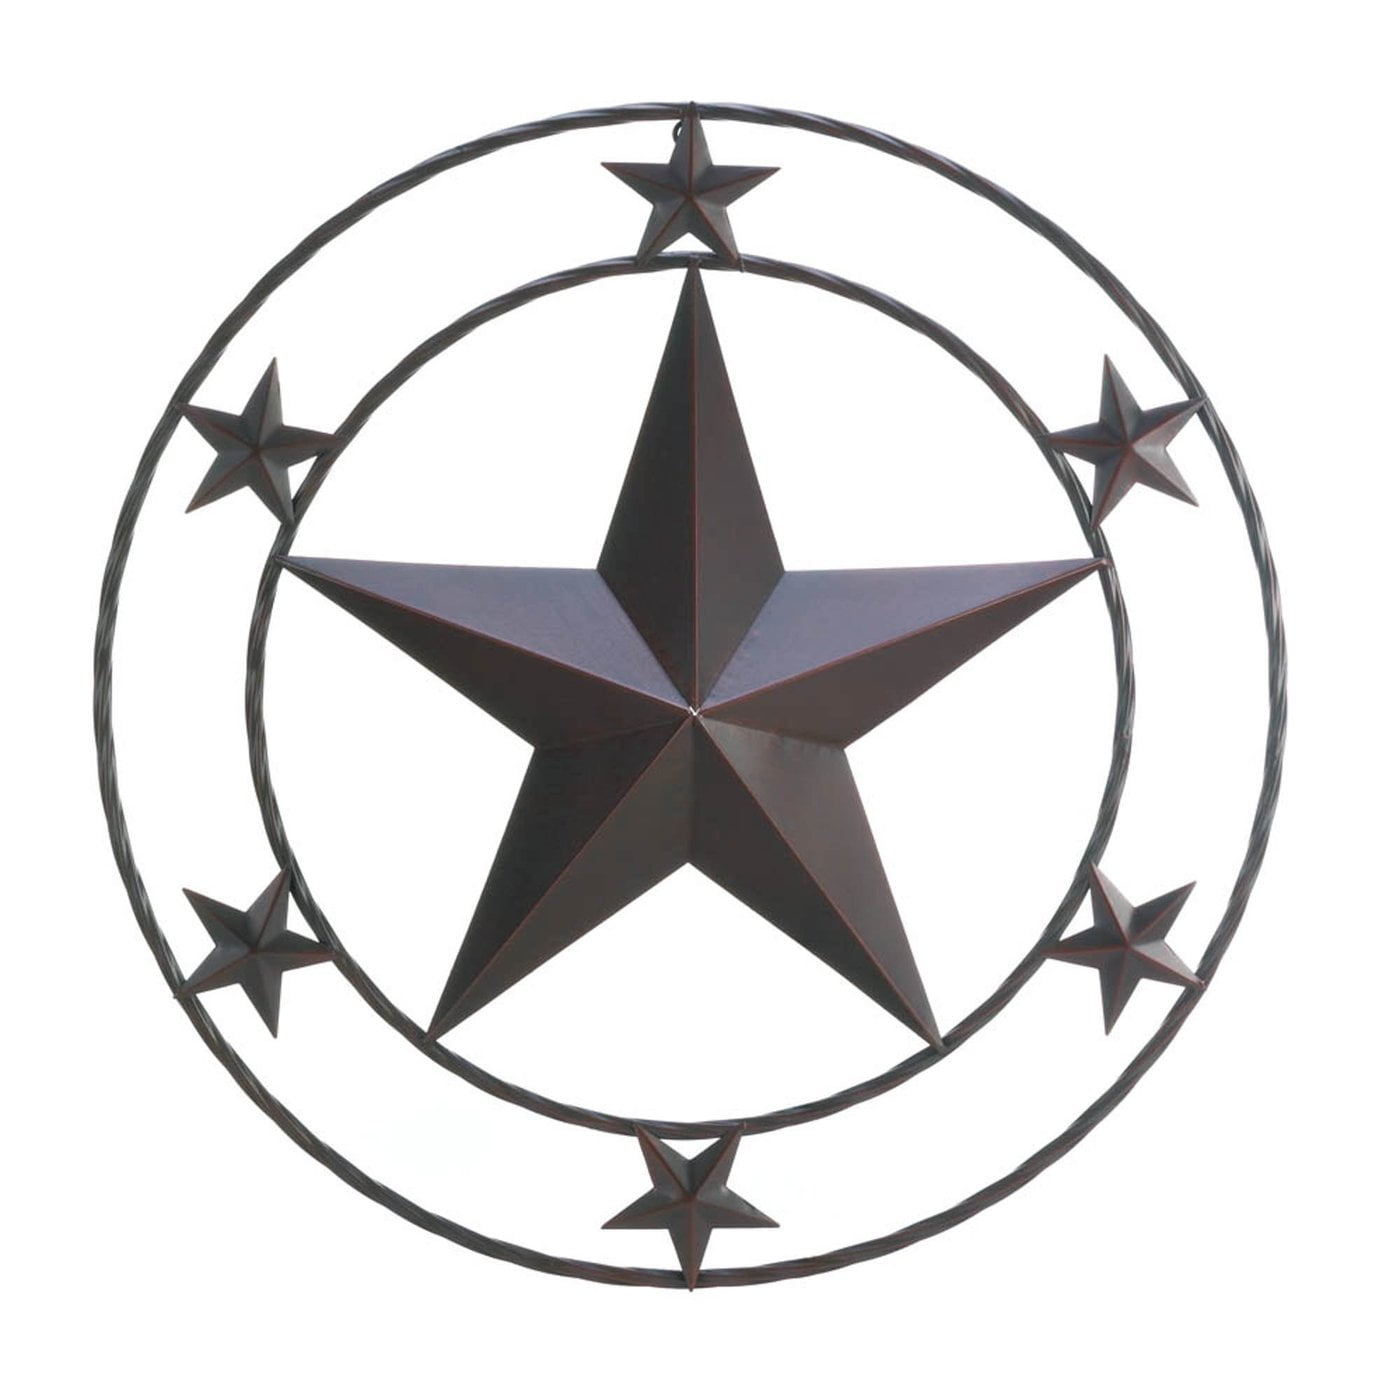 Texas Star Wall Plaque Metal Chocolate Color 25 inches Painted WOW